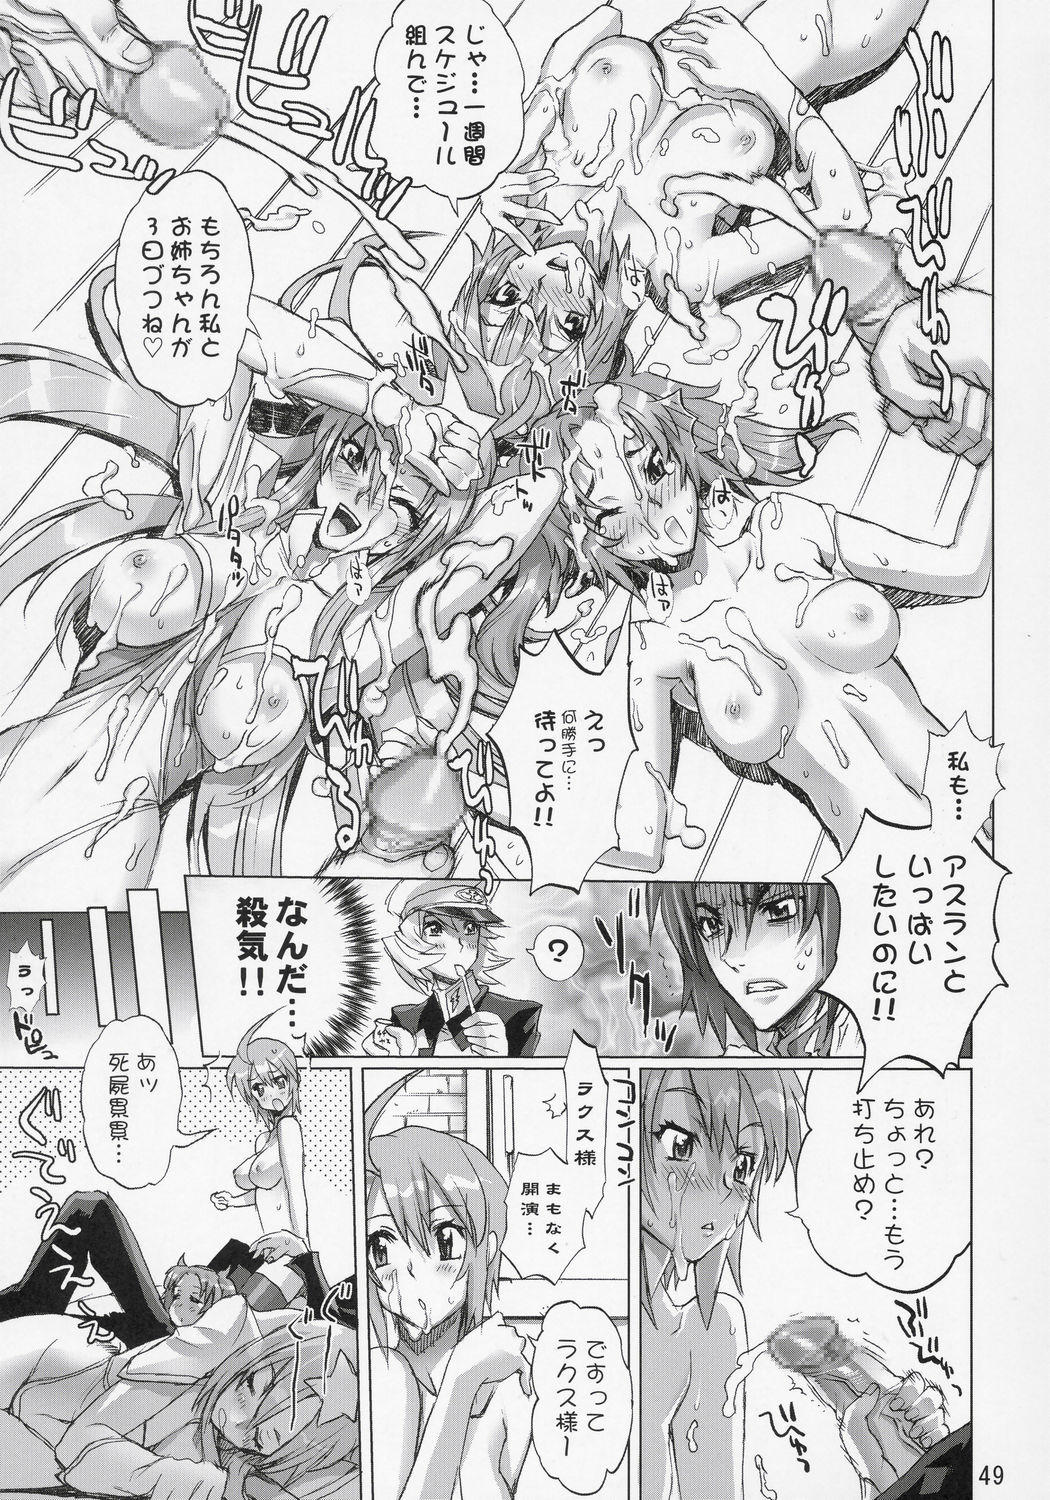 (C69) [Digital Accel Works] Inazuma Warrior 2 (Various) page 48 full